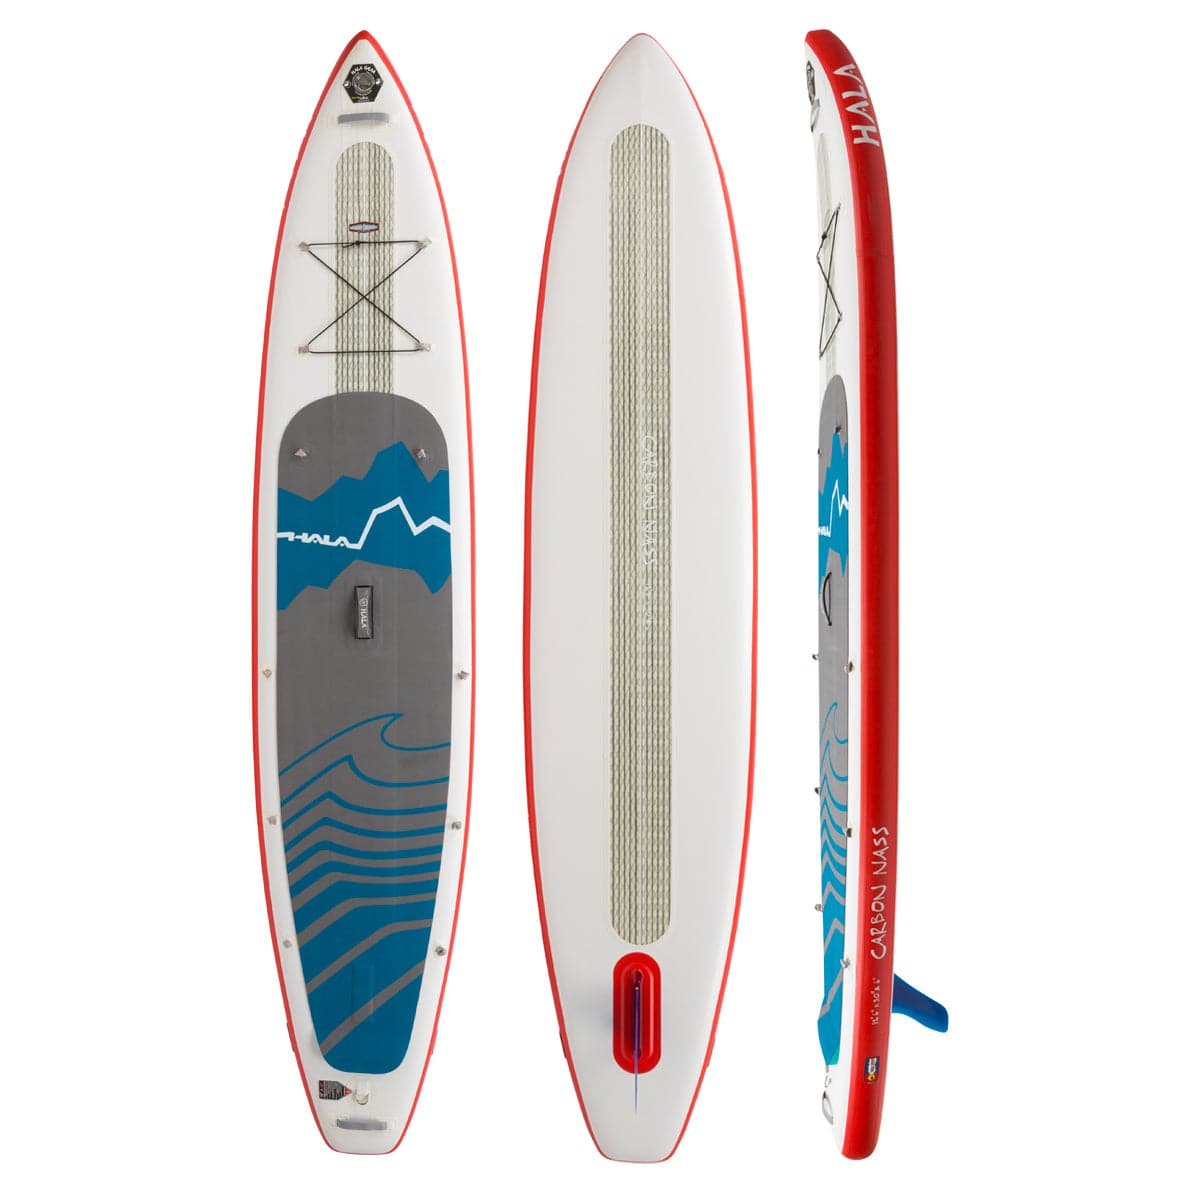 Featuring the Carbon Nass 12'6 Inflatable SUP inflatable sup manufactured by Hala shown here from a fourth angle.